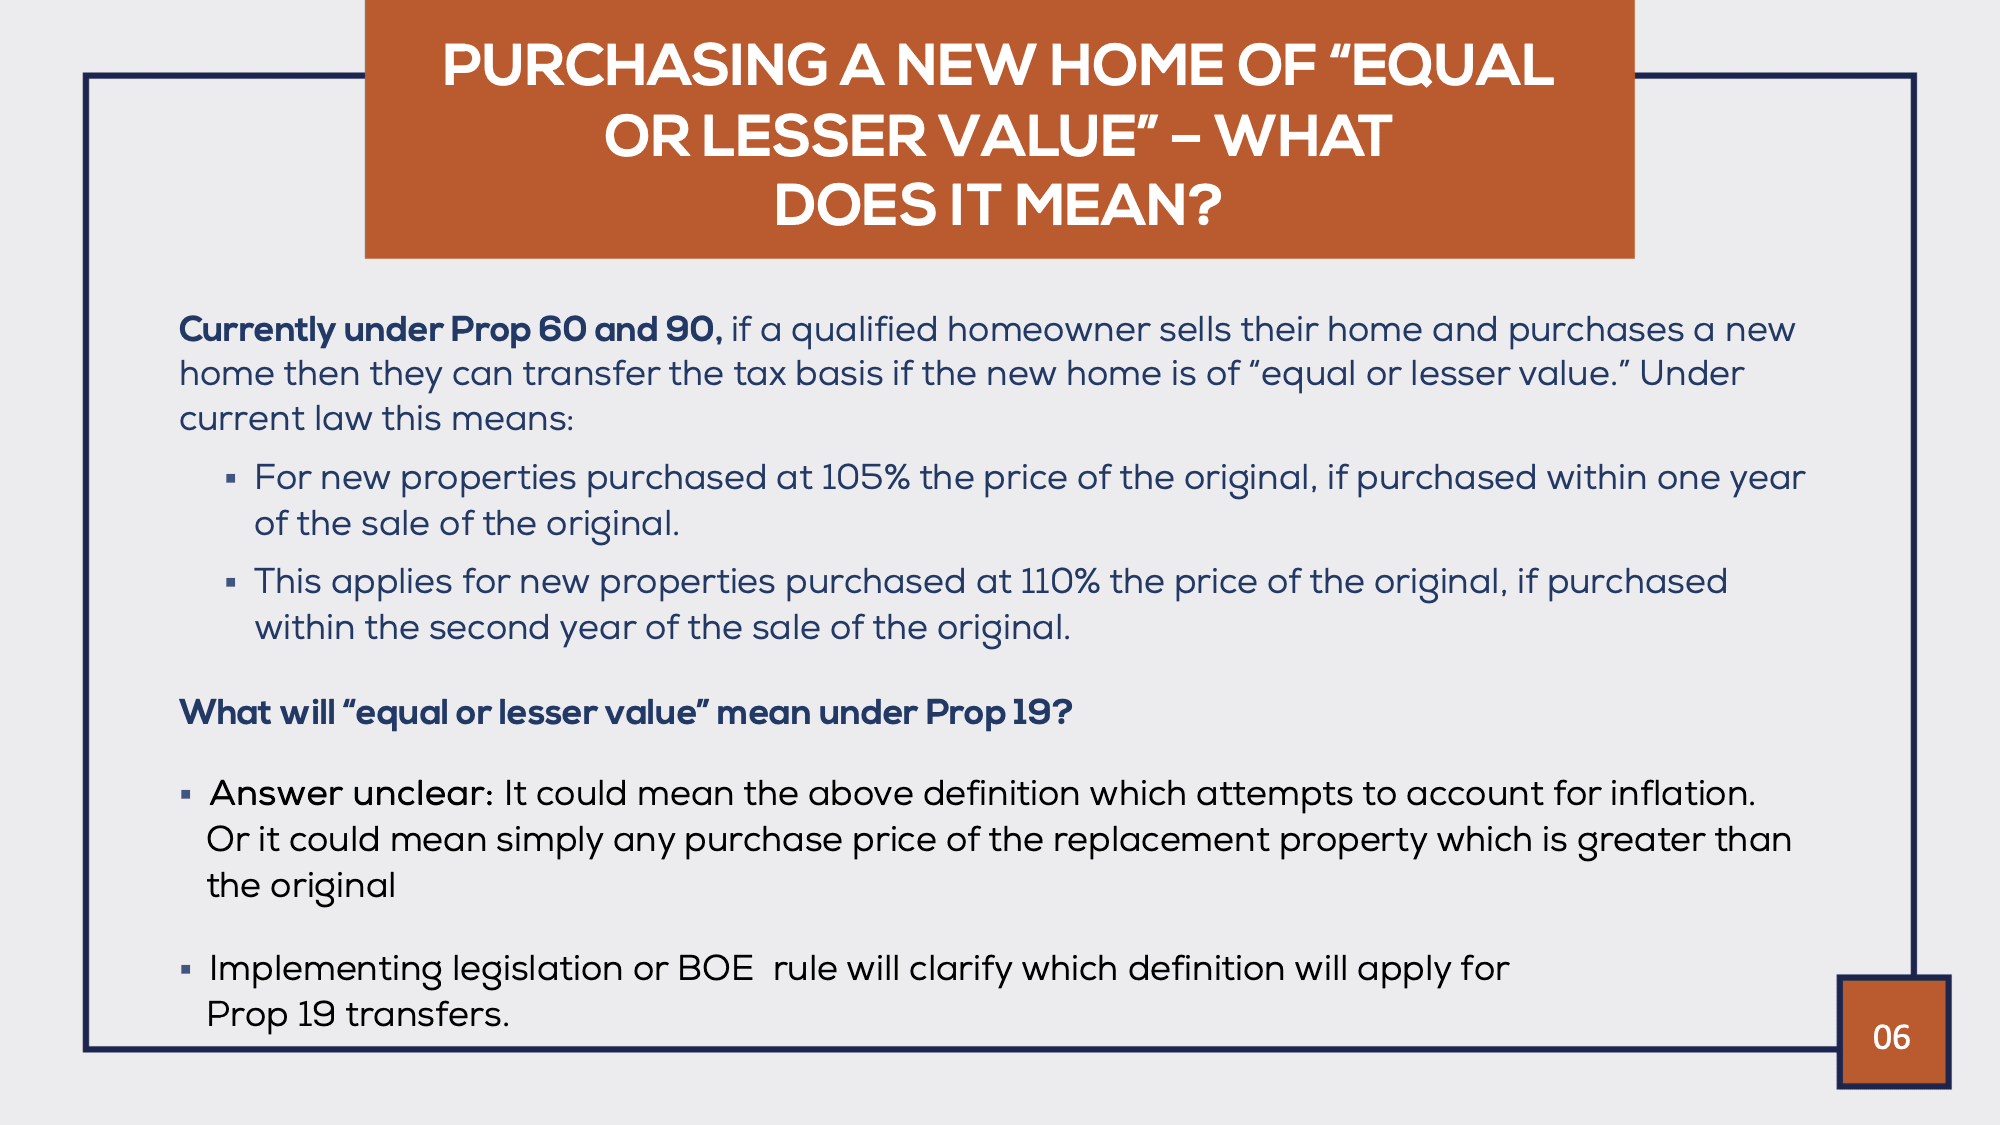 Explaining "equal and lesser value" detail of Proposition 19